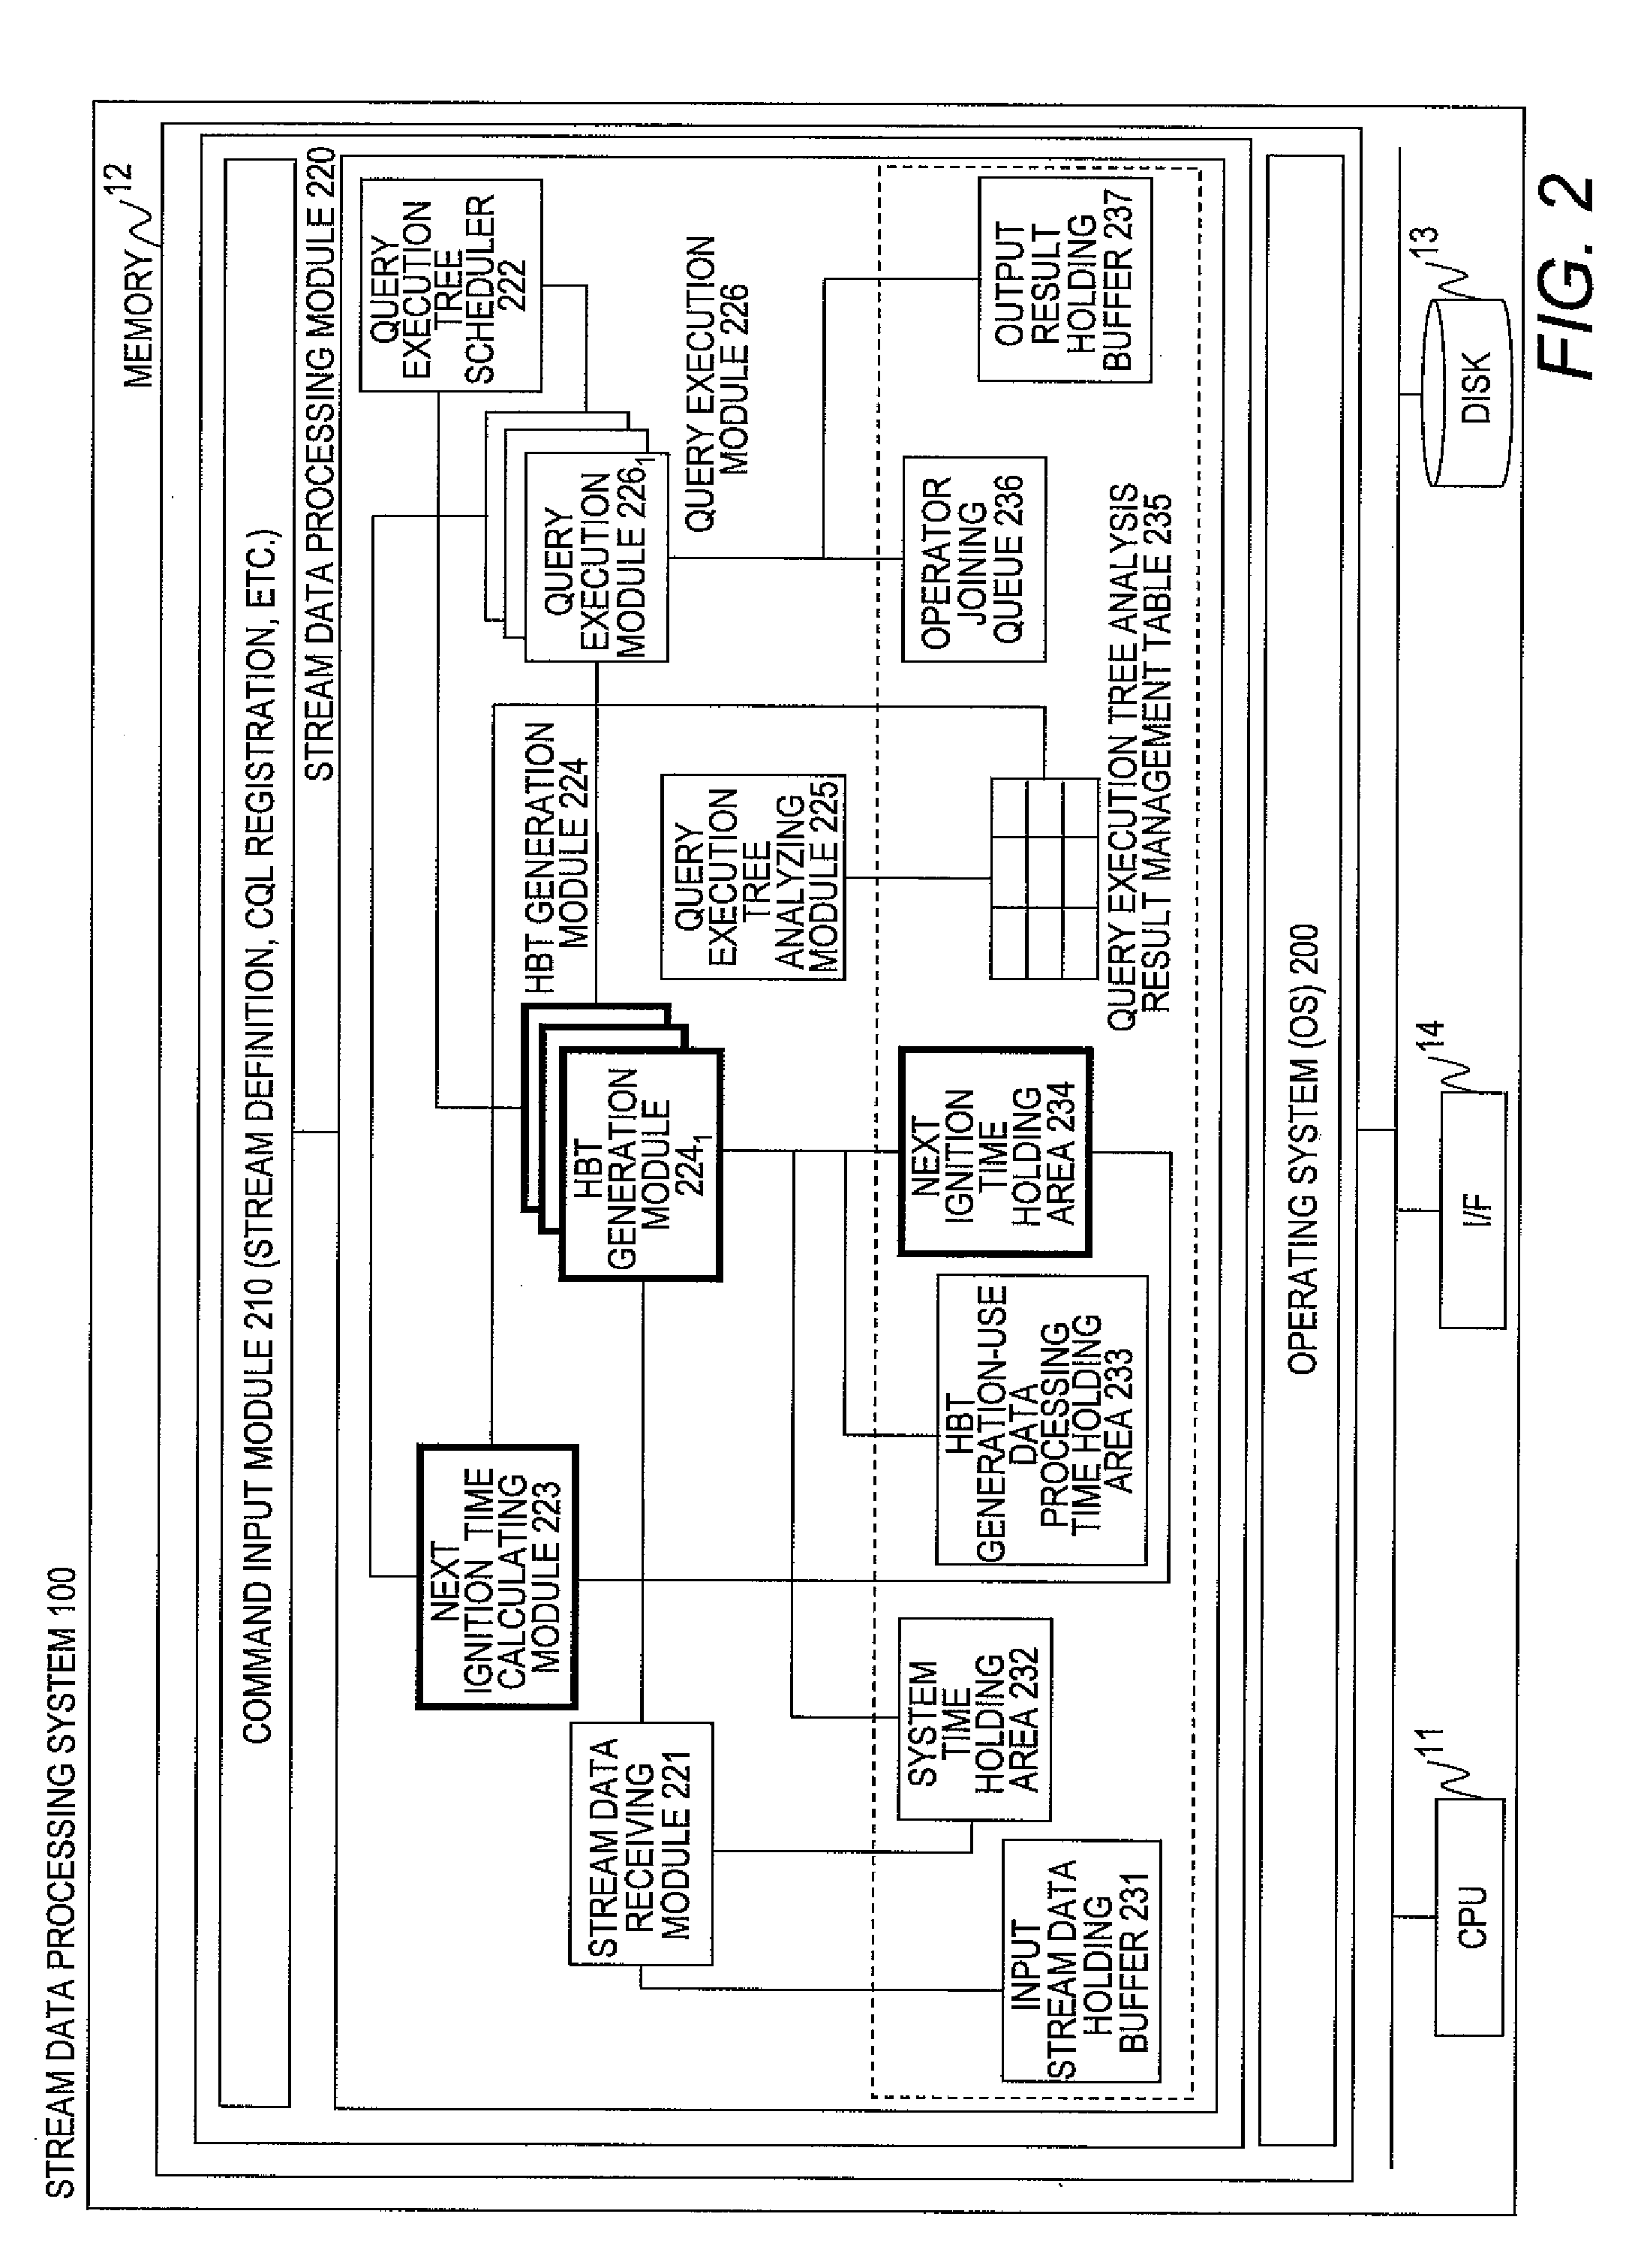 Machine-readable medium for storing a stream data processing program and computer system